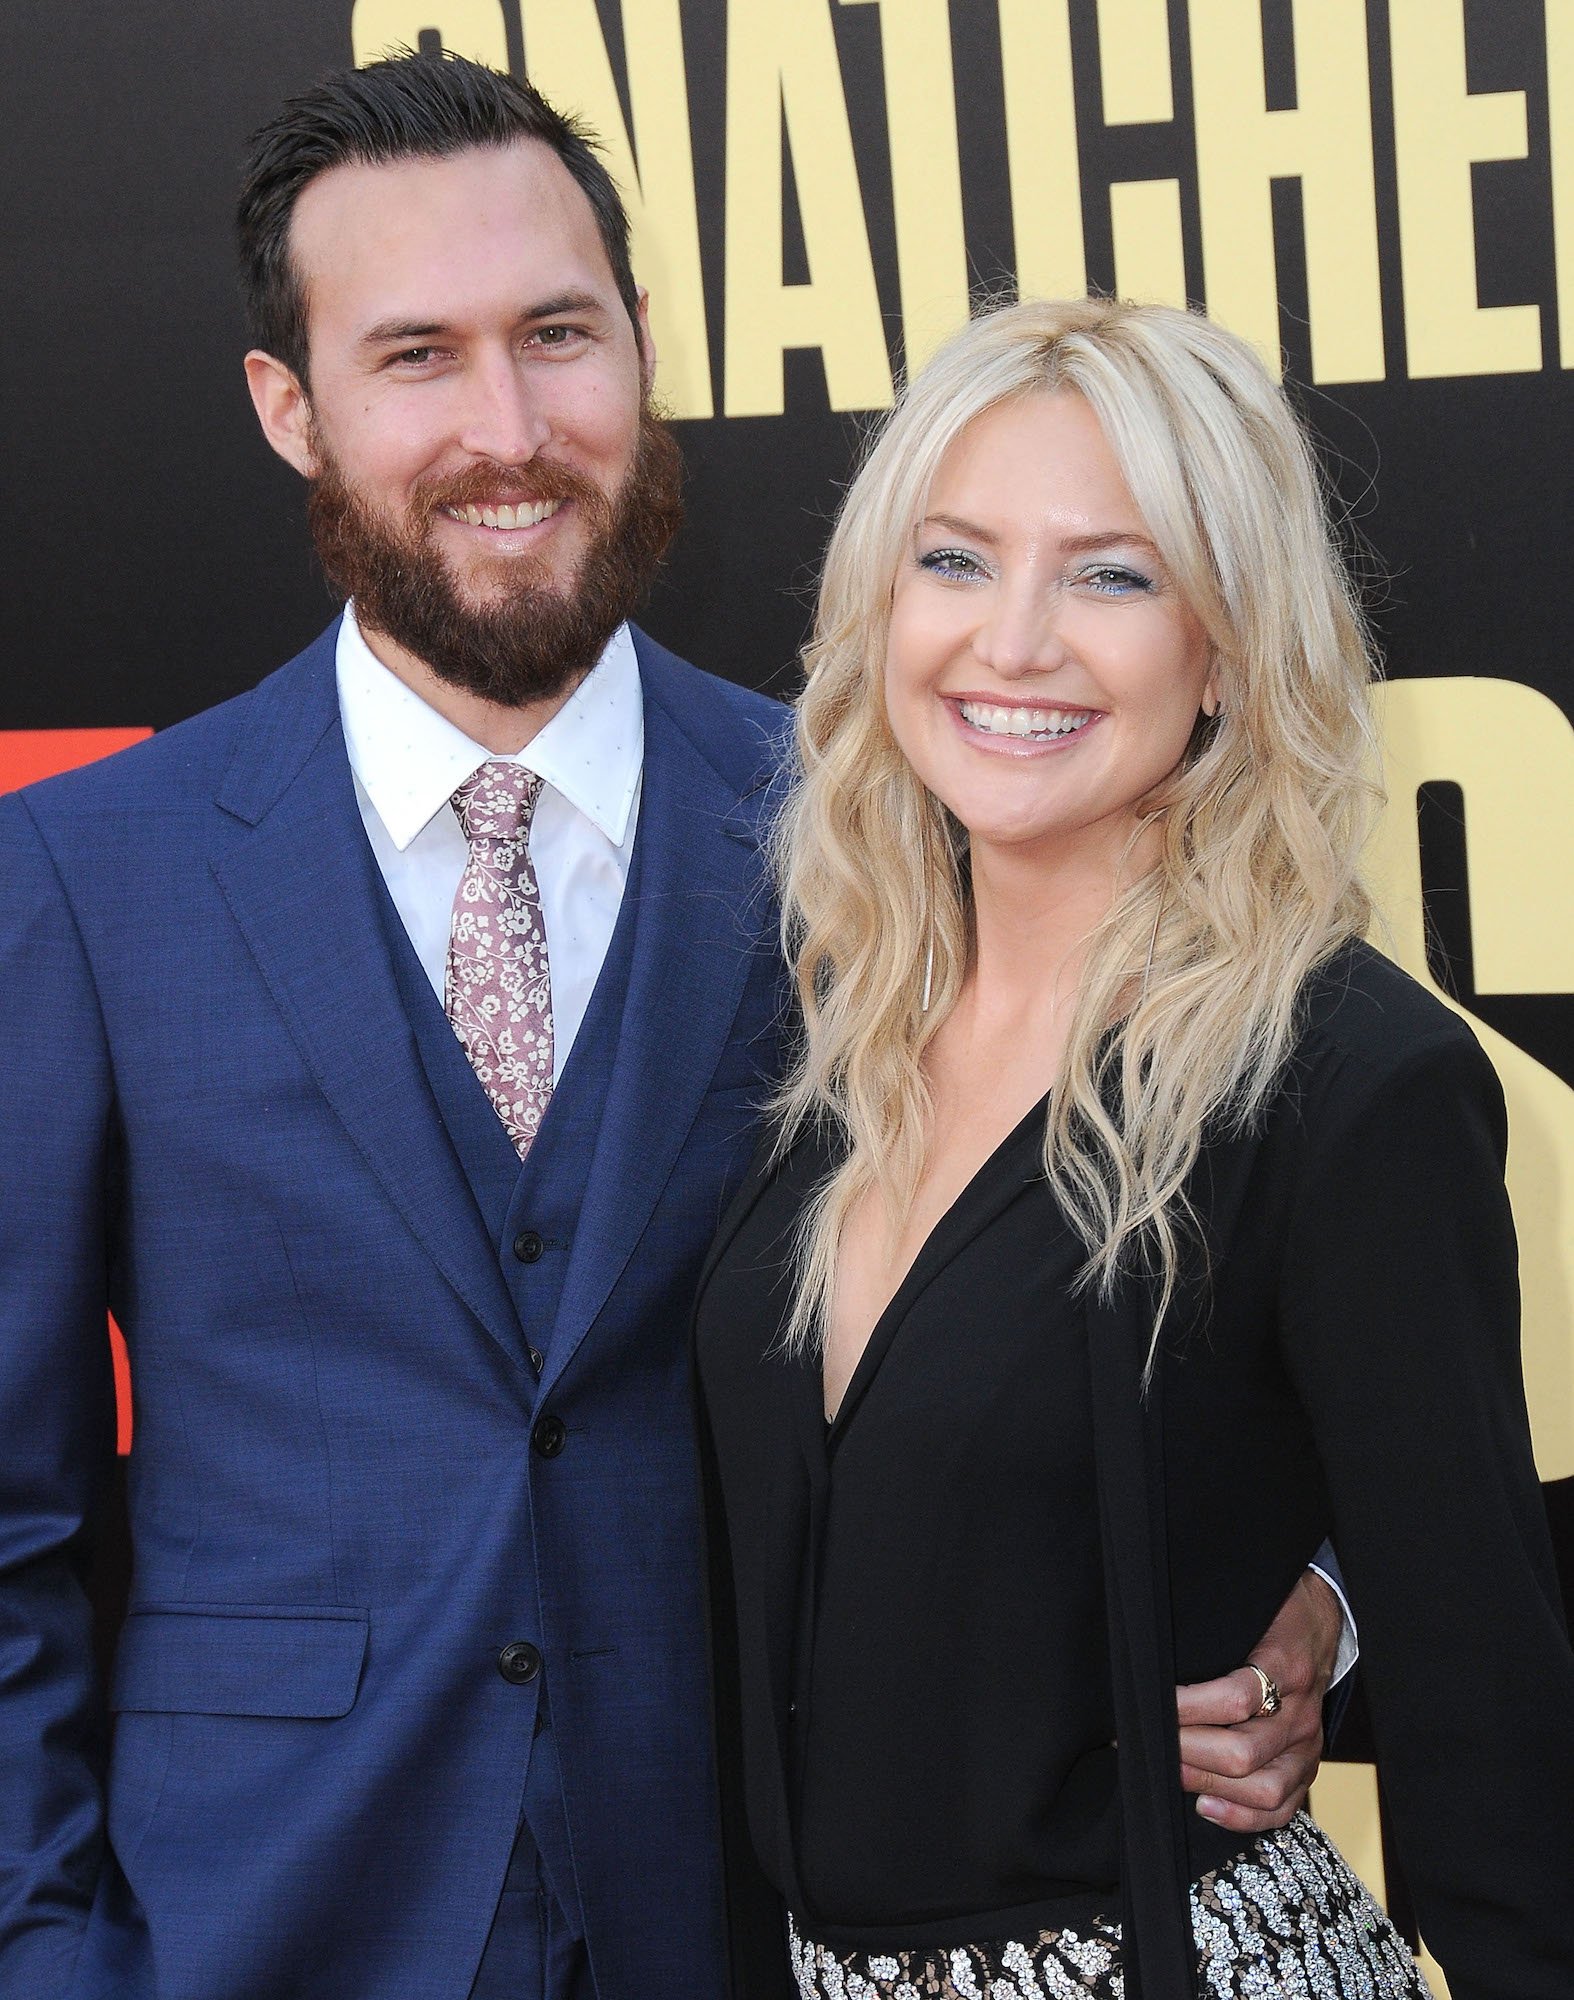 Danny Fujikawa and Kate Hudson attending the premiere of the 2017 film 'Snatched'